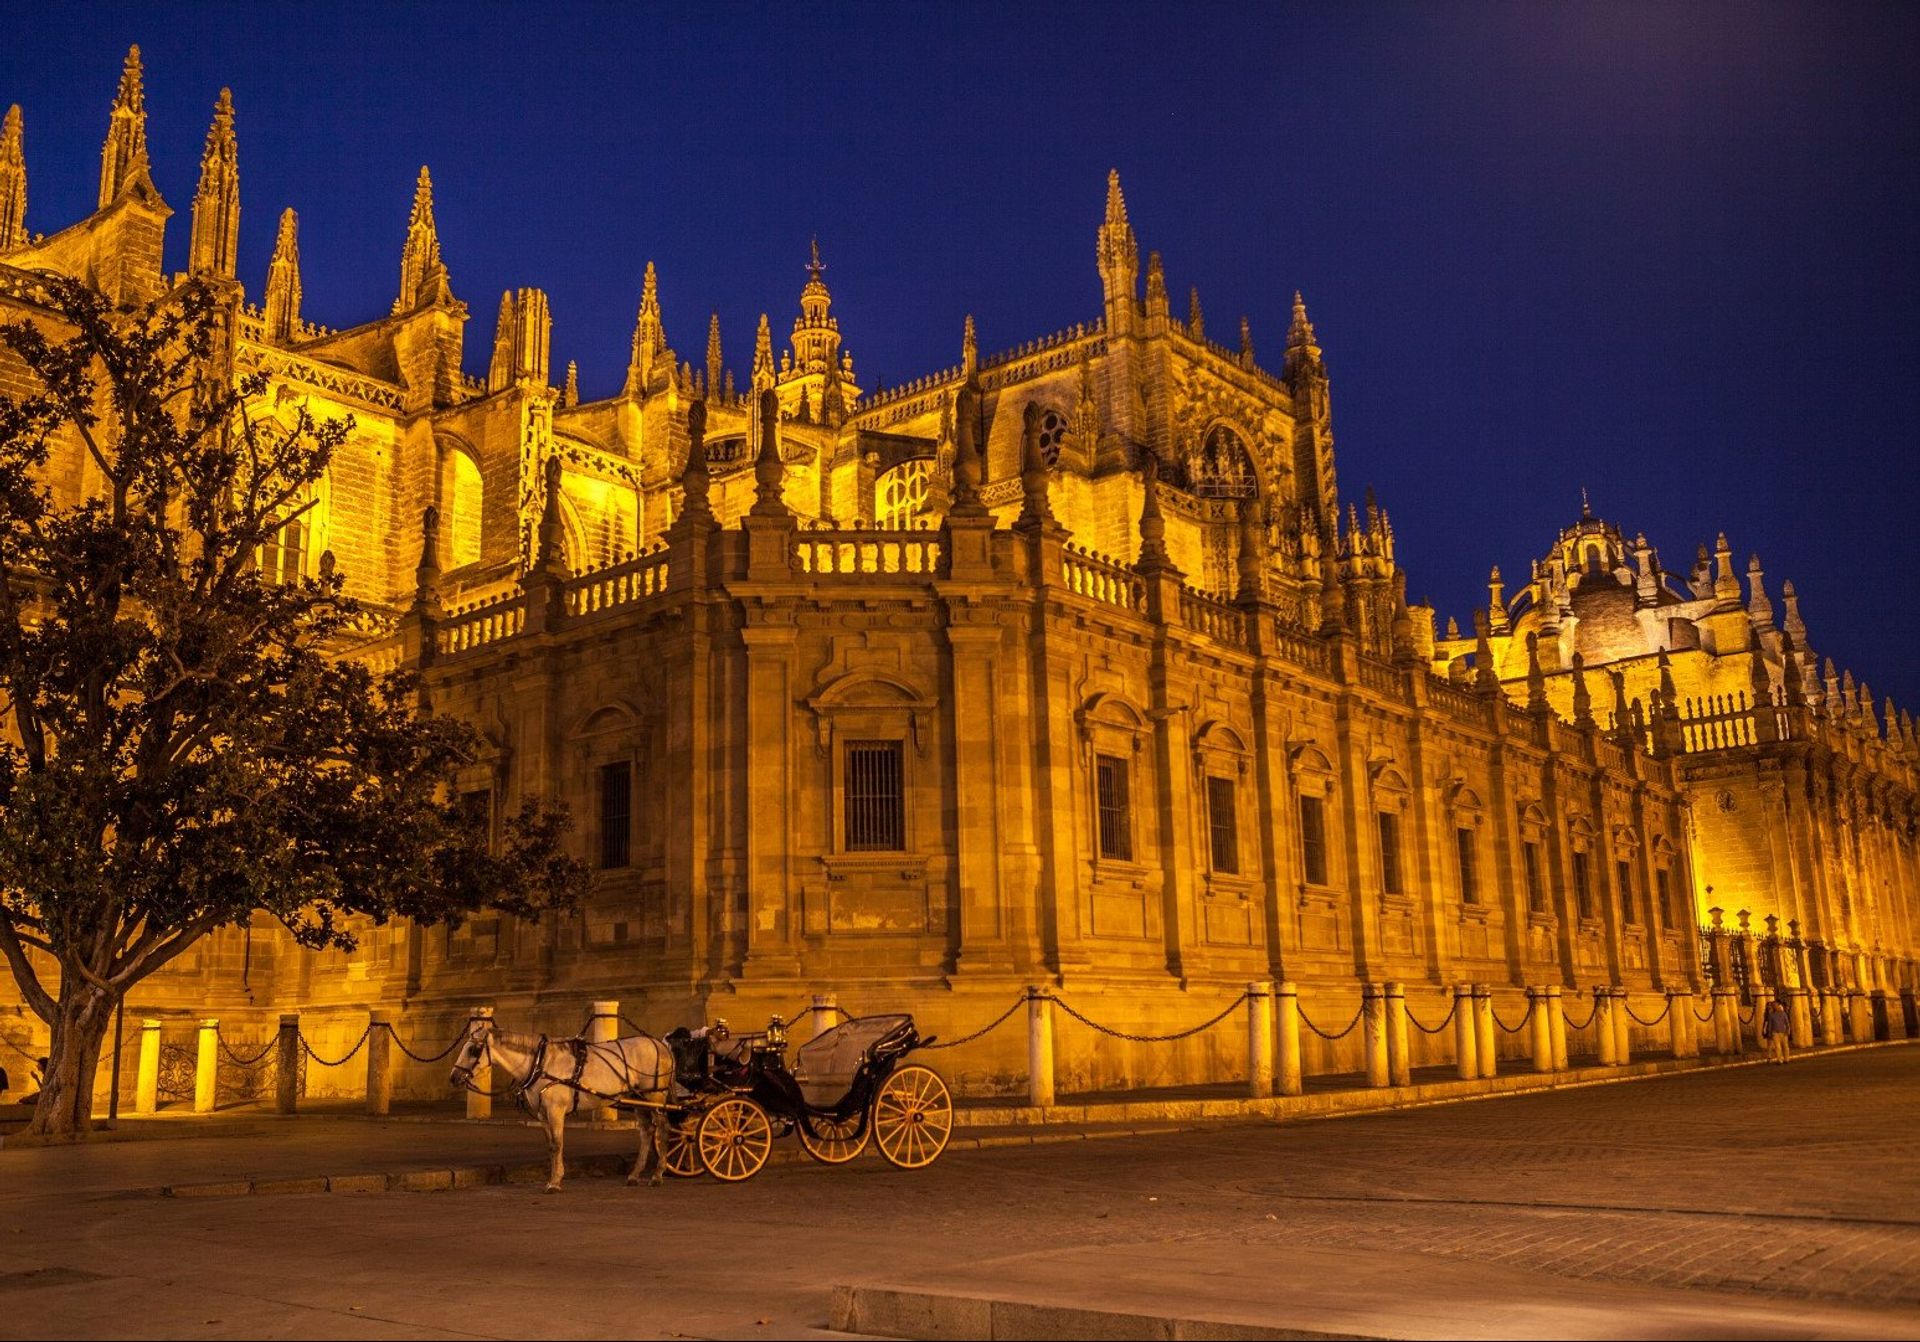 The stunning 16th century Seville Cathedral is the world's fourth-largest church